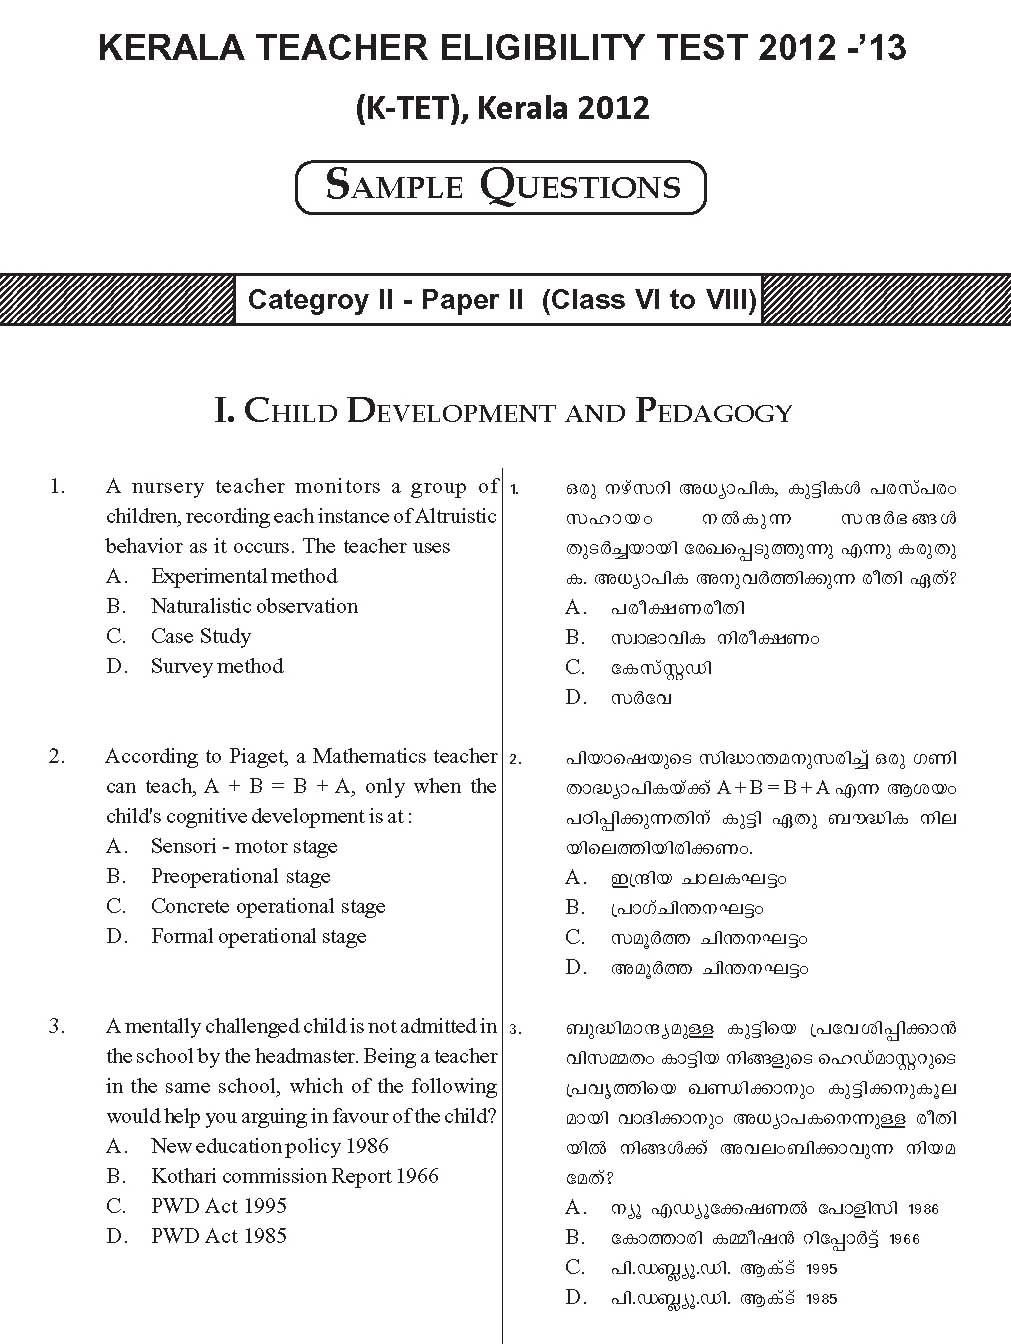 KTET Category II Paper II Question Paper with Answers 2012 1